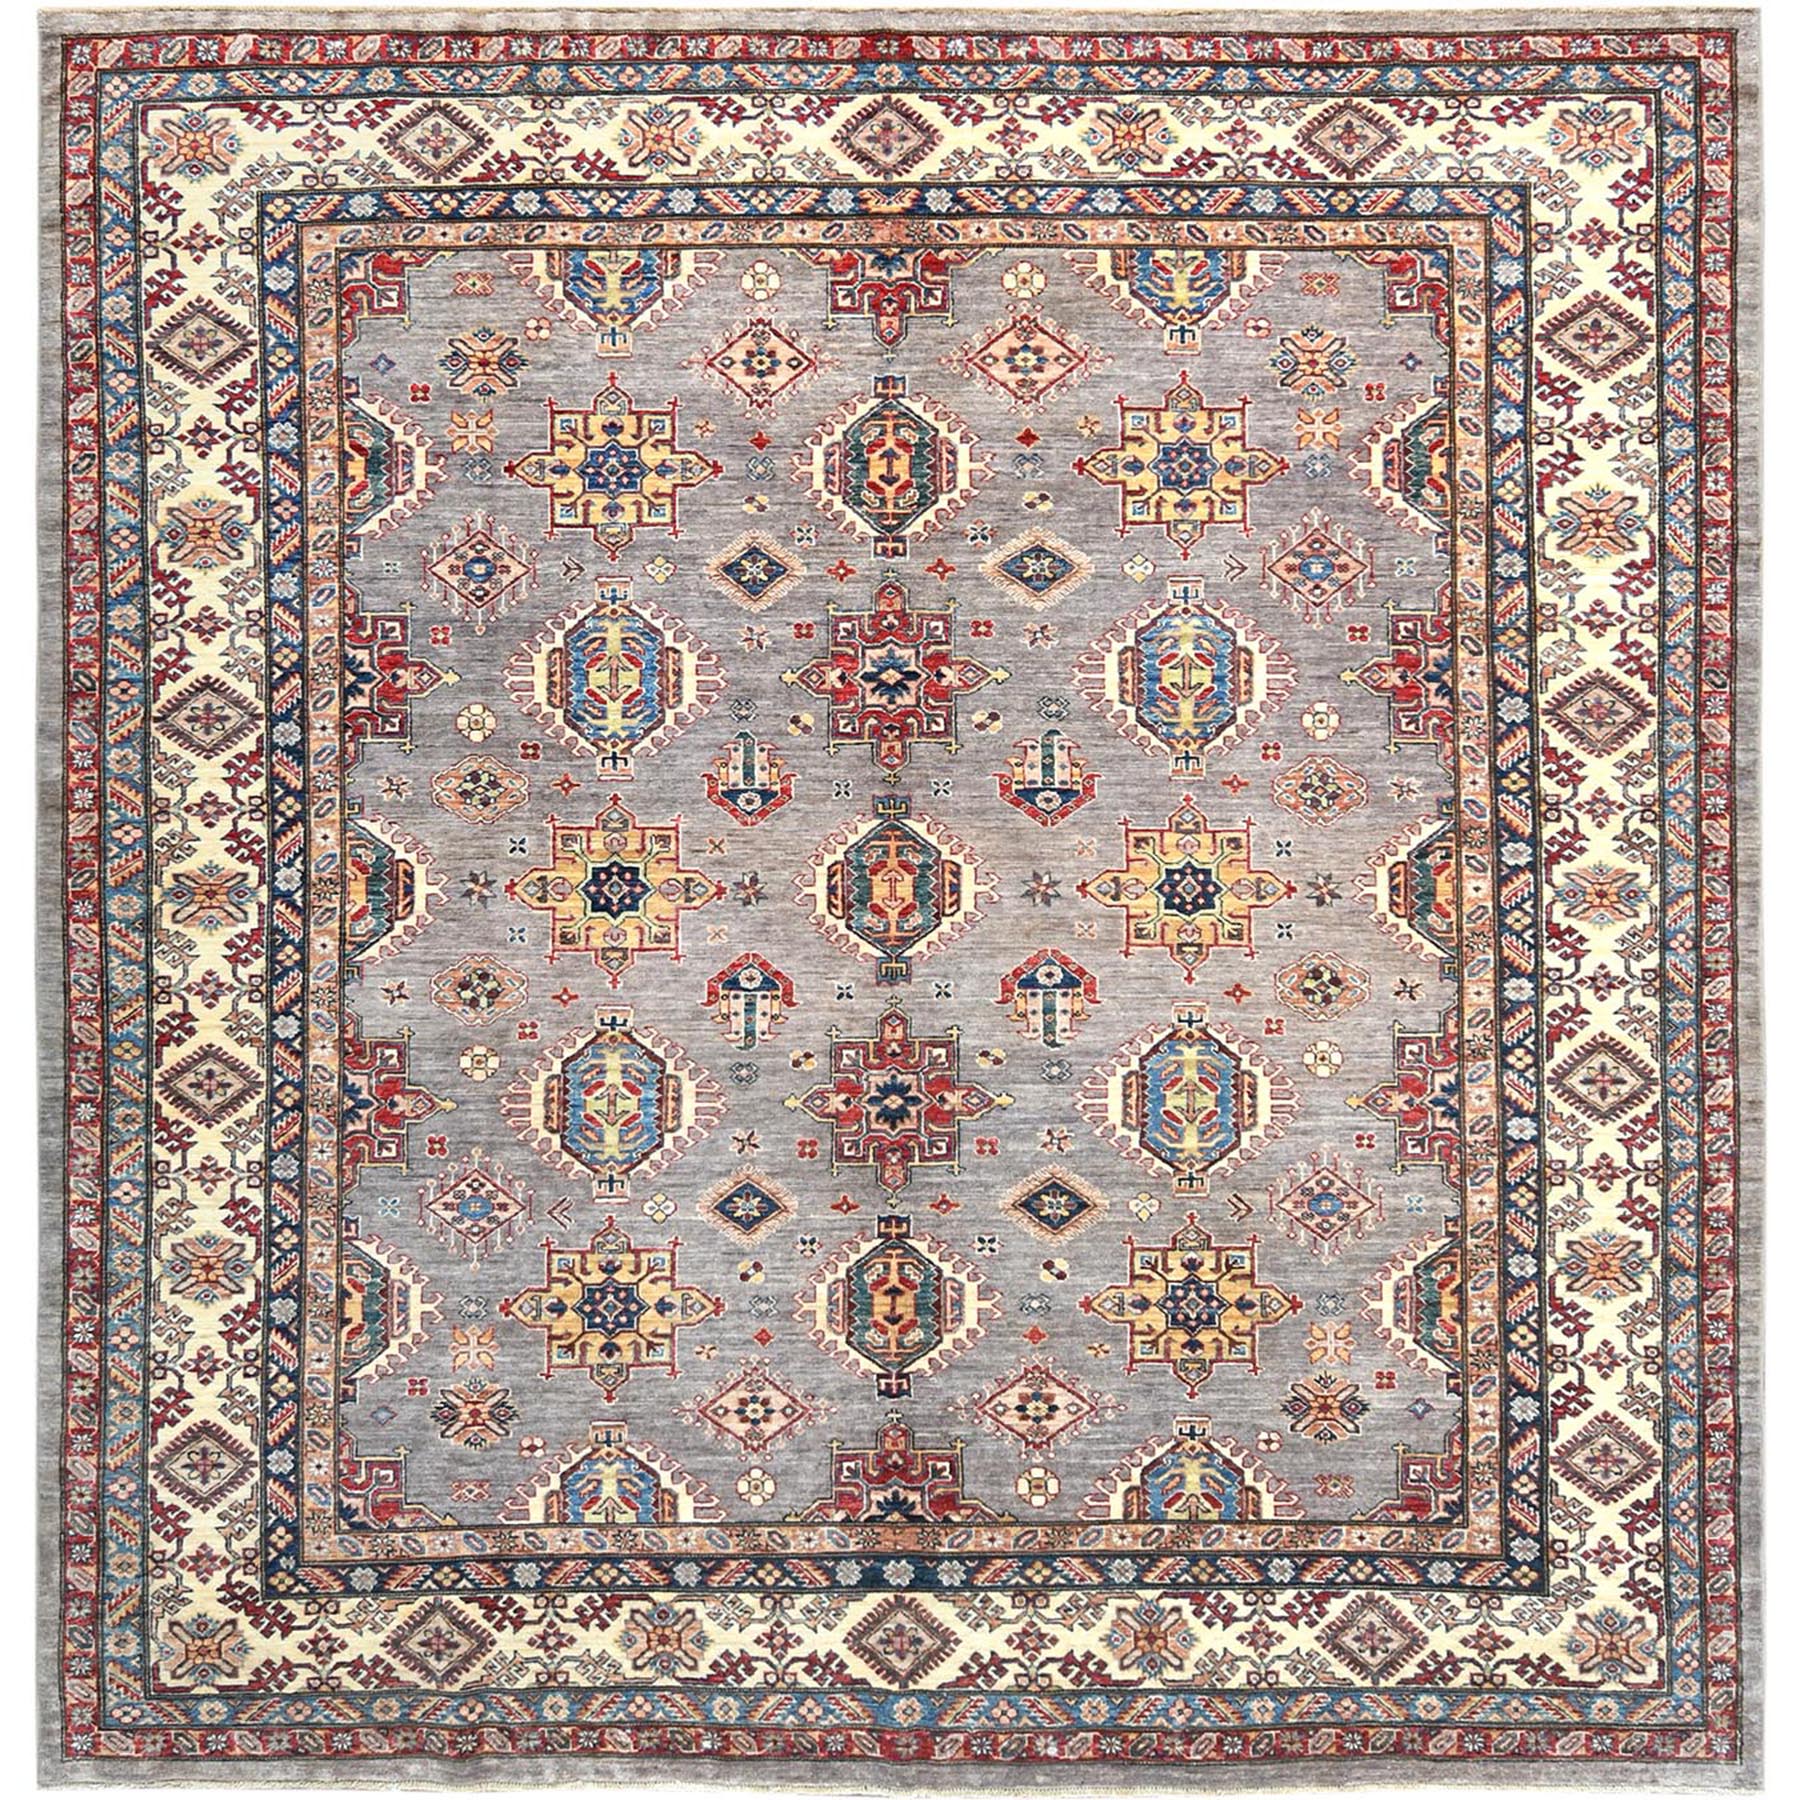  Wool Hand-Knotted Area Rug 9'7